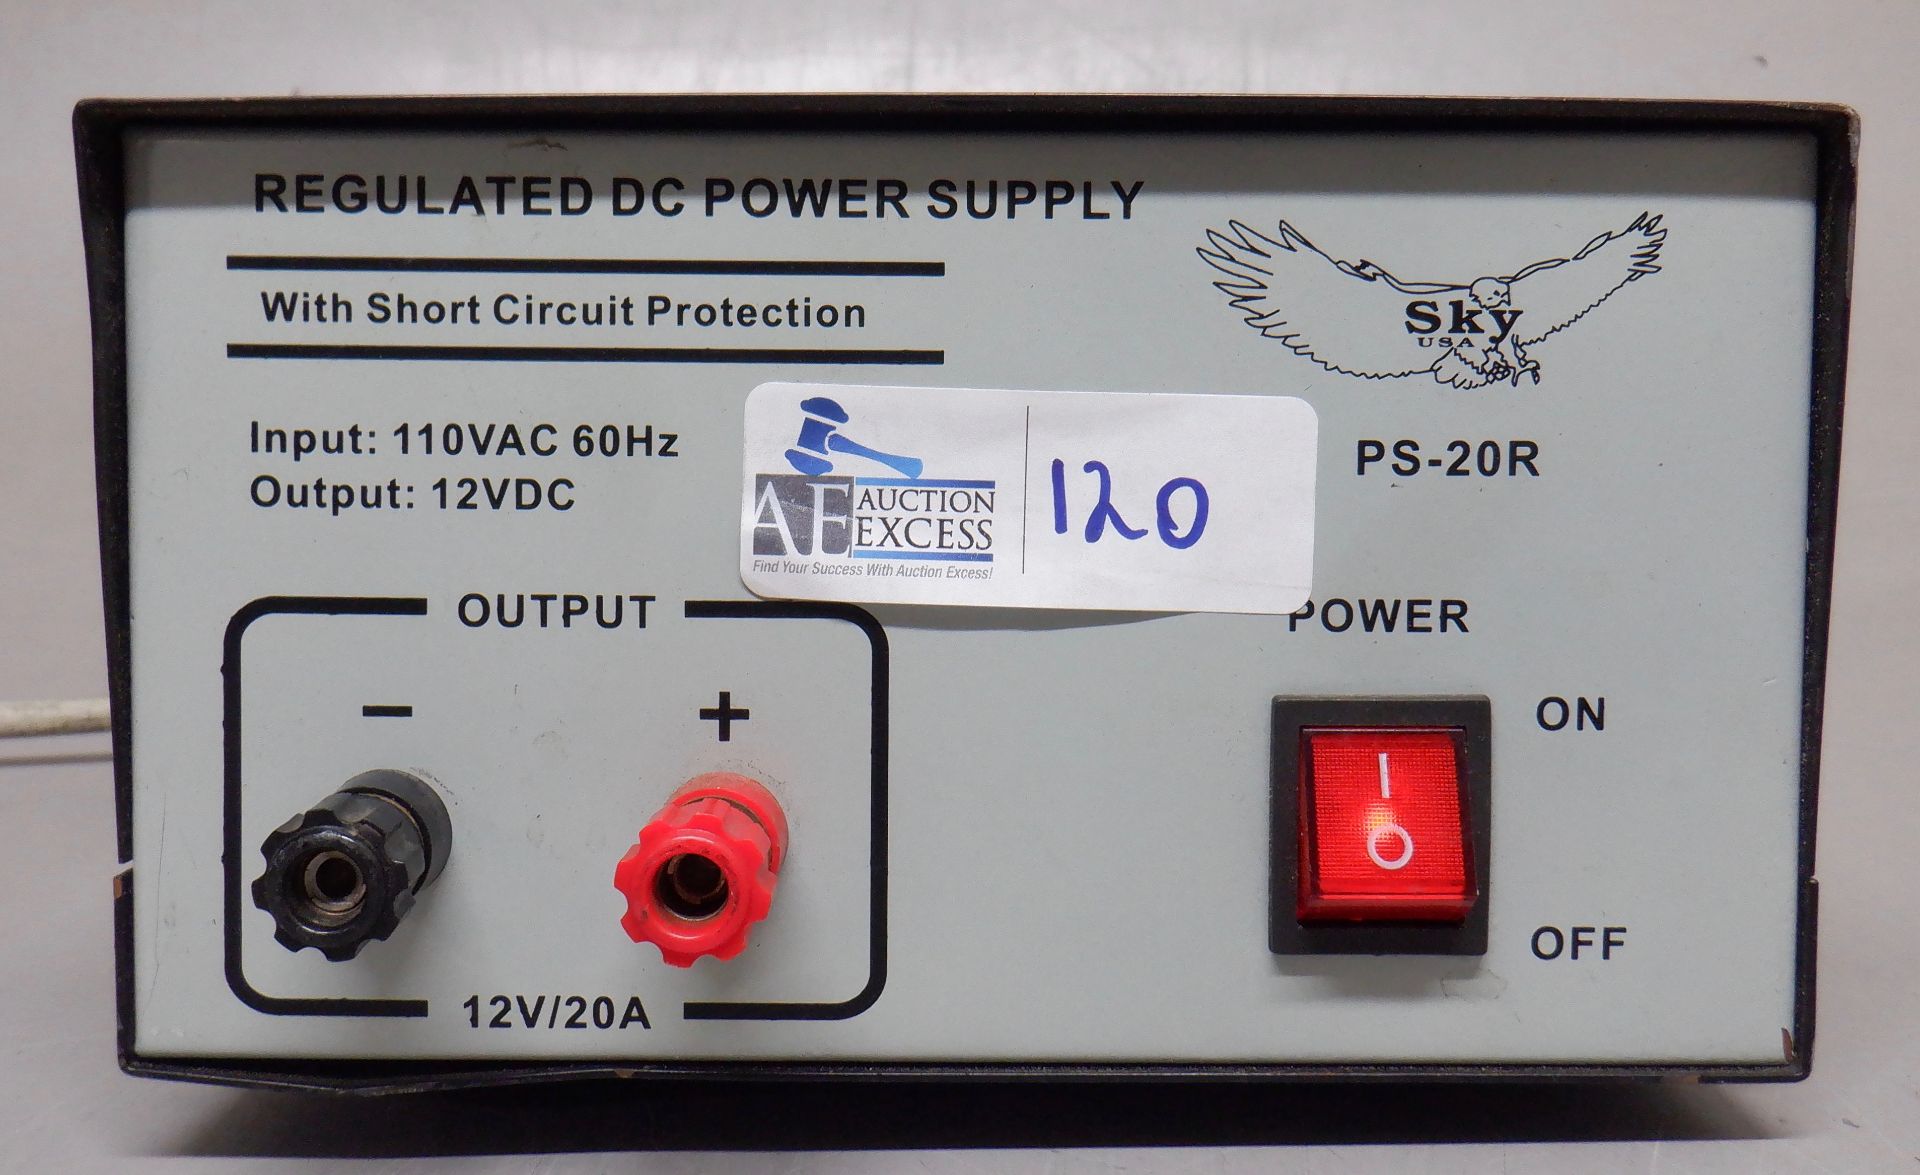 SKY REGULATED DC POWER SUPPLY PS-20R